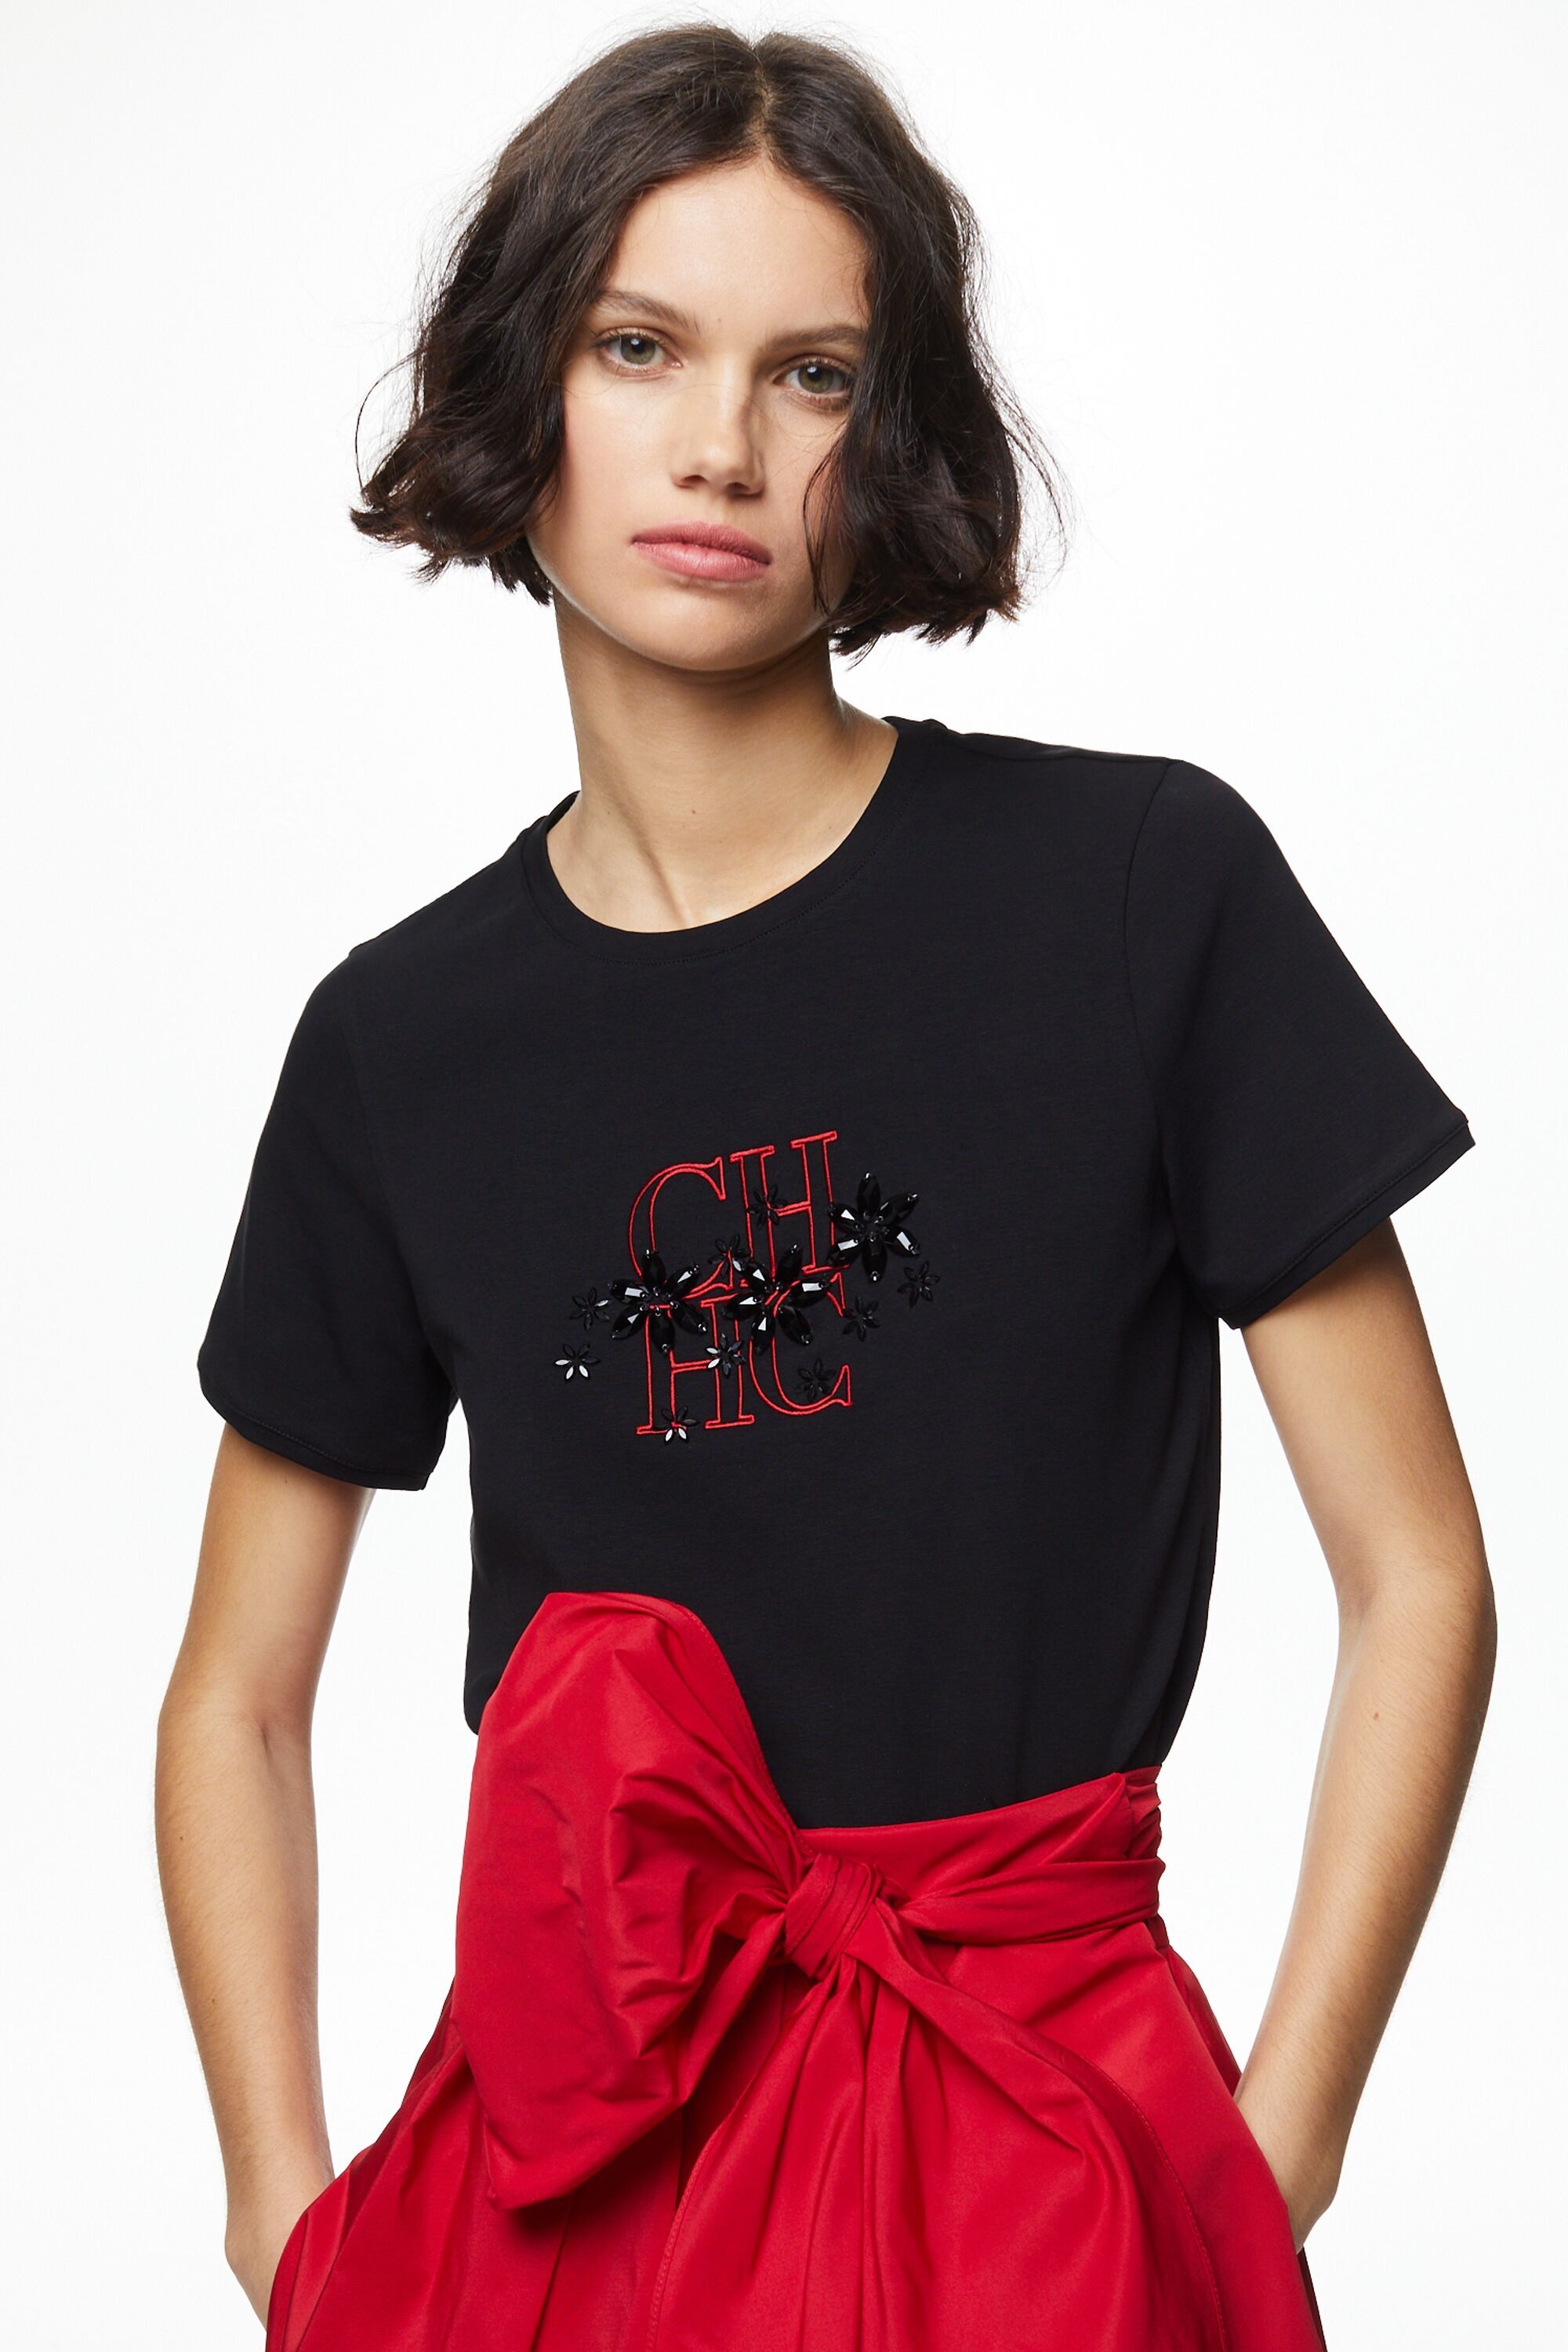 CH embroidered t-shirt with crystals